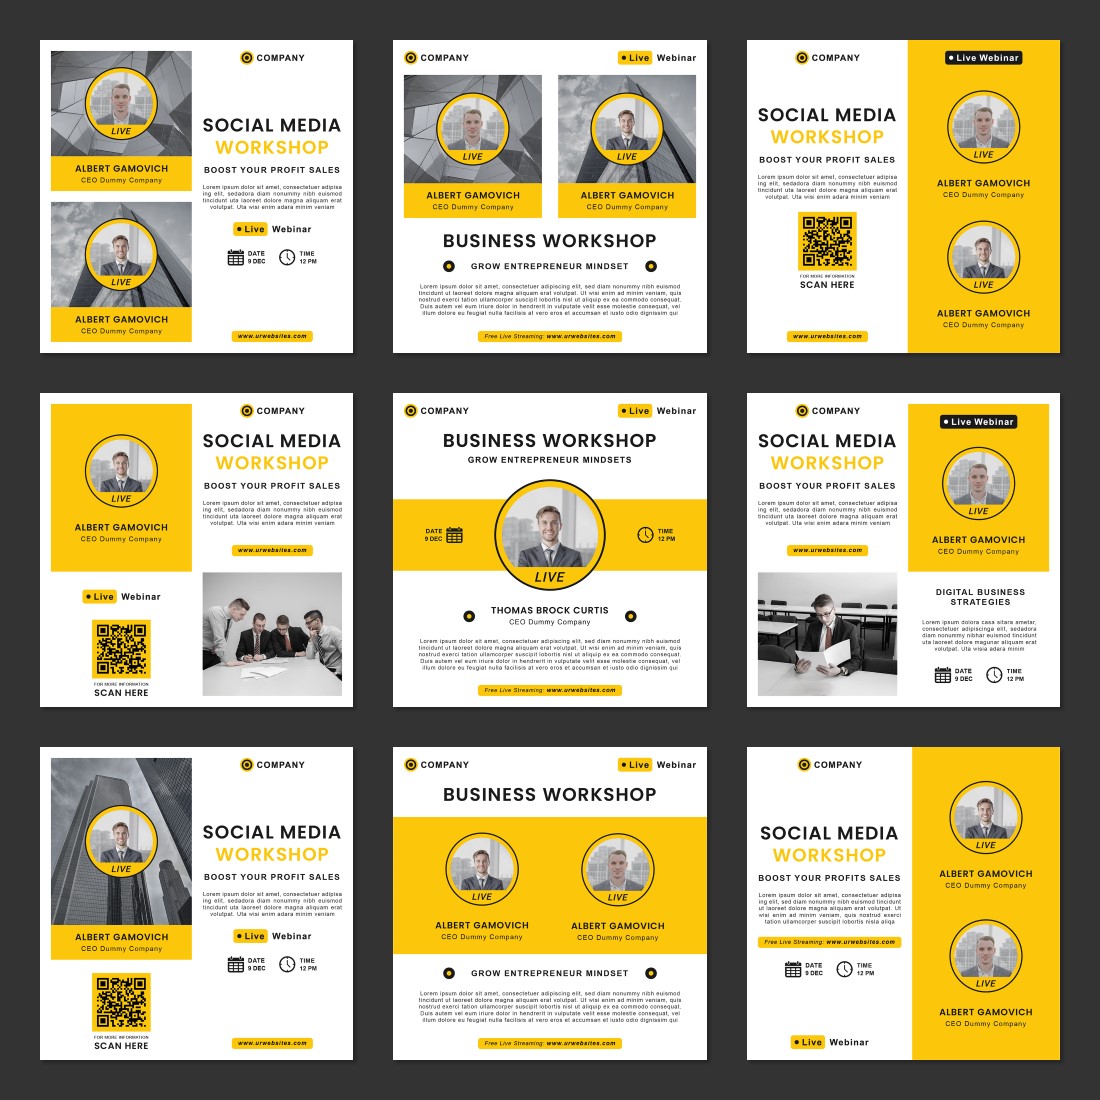 Online Business Workshop Social Media Post Templates created by sigmastudio.